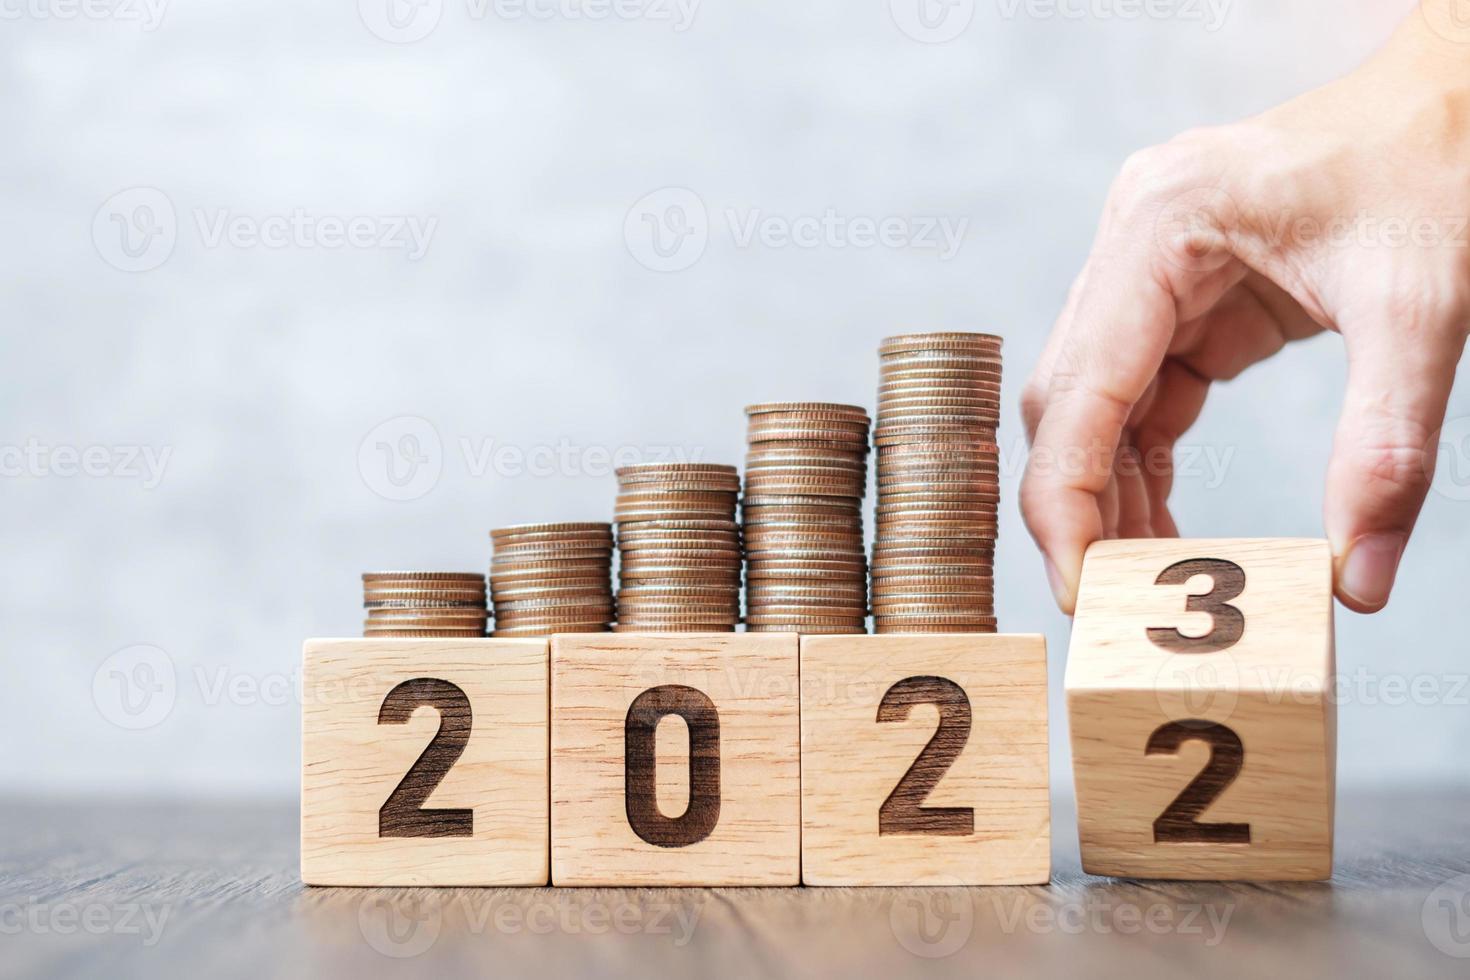 flipping 2022 to 2023 year block with Coins stack. Money, Budget, tax, investment, financial, savings and New Year Resolution concepts 12872267 Stock Photo at Vecteezy